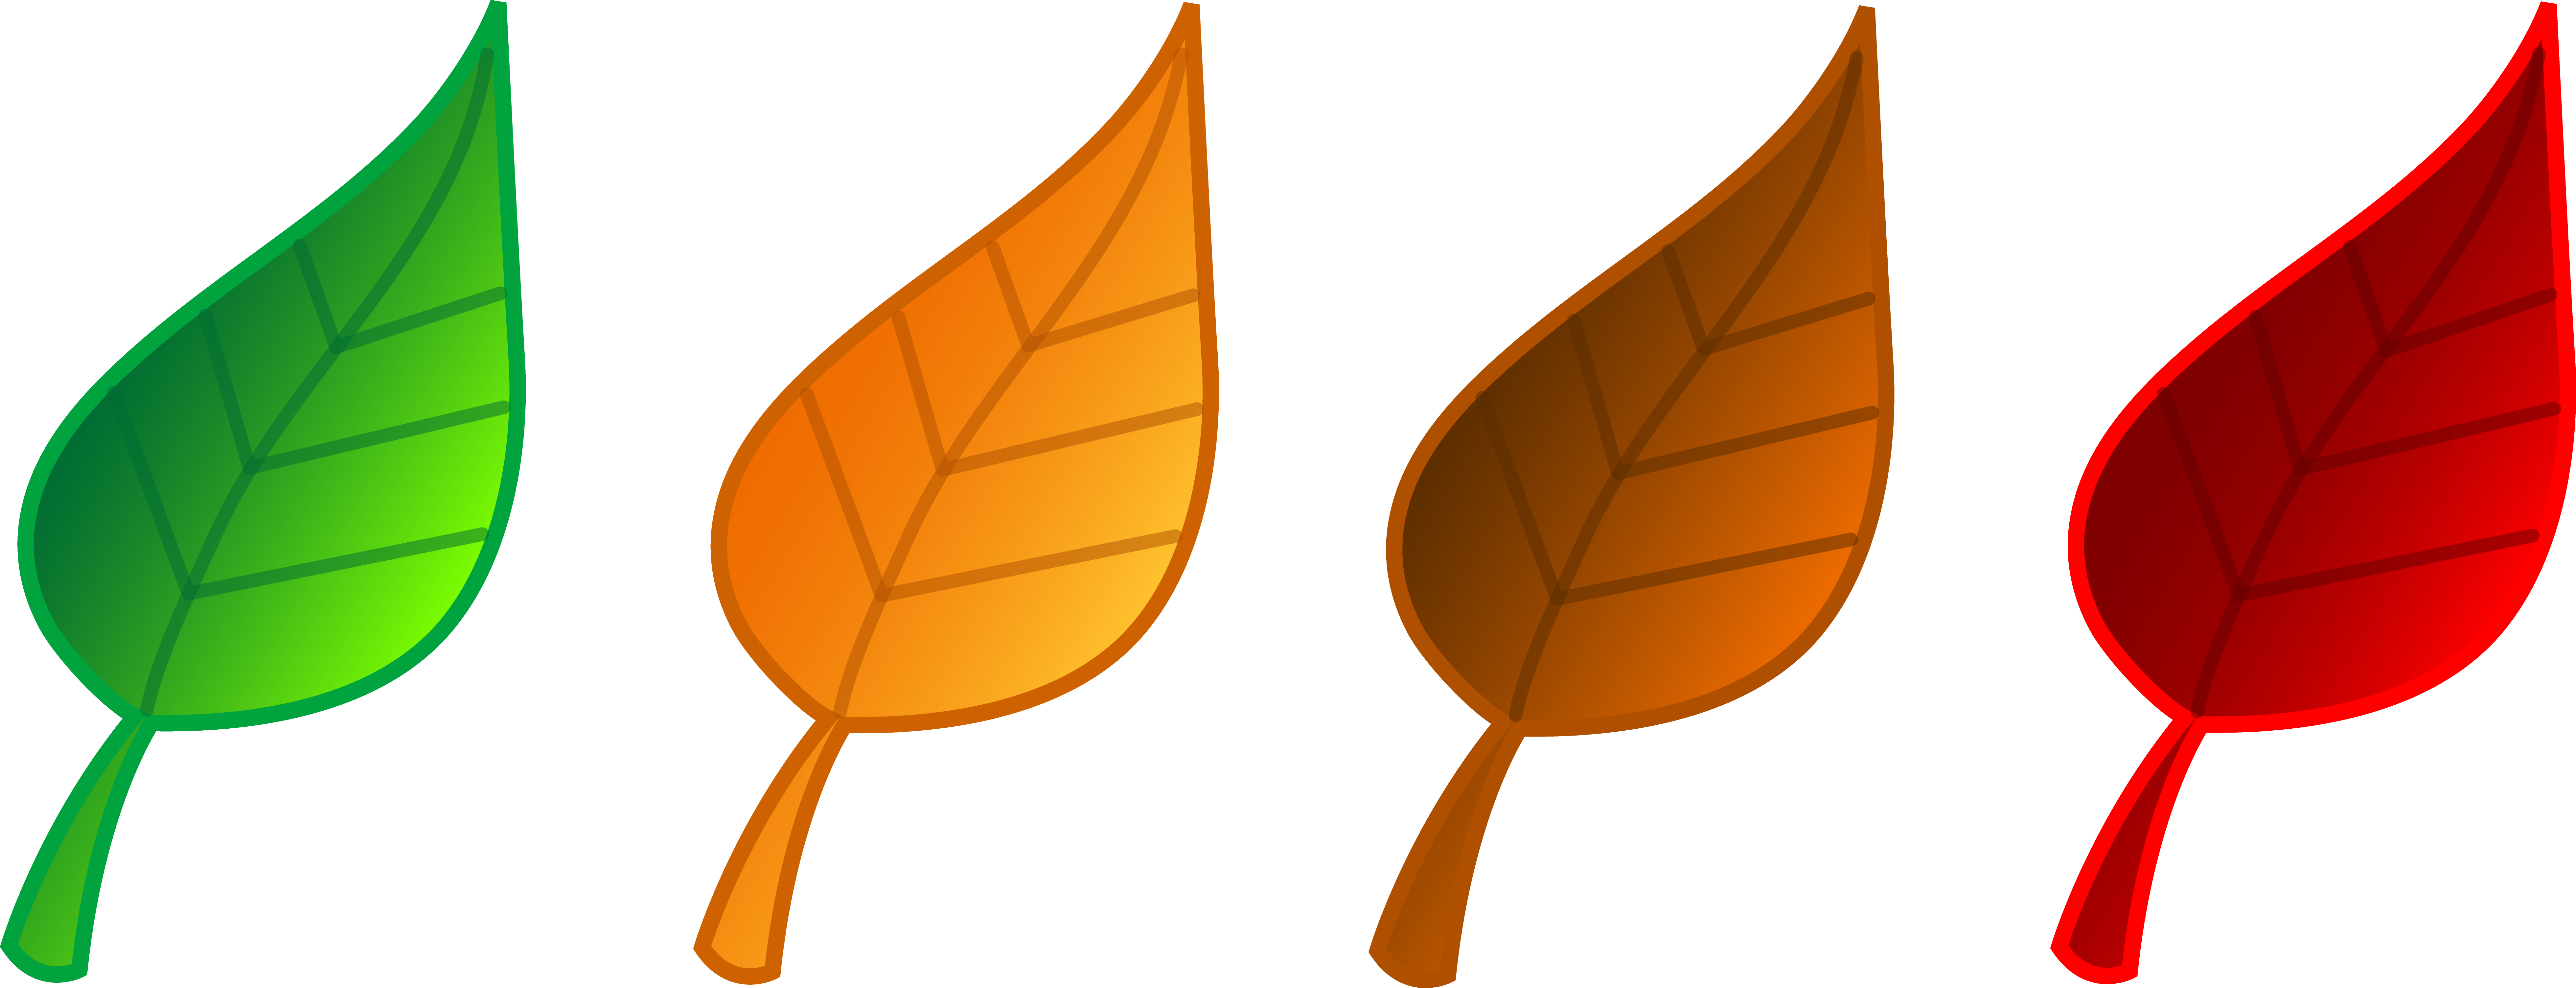 Fall Leaves Clip Art Images & Pictures - Becuo